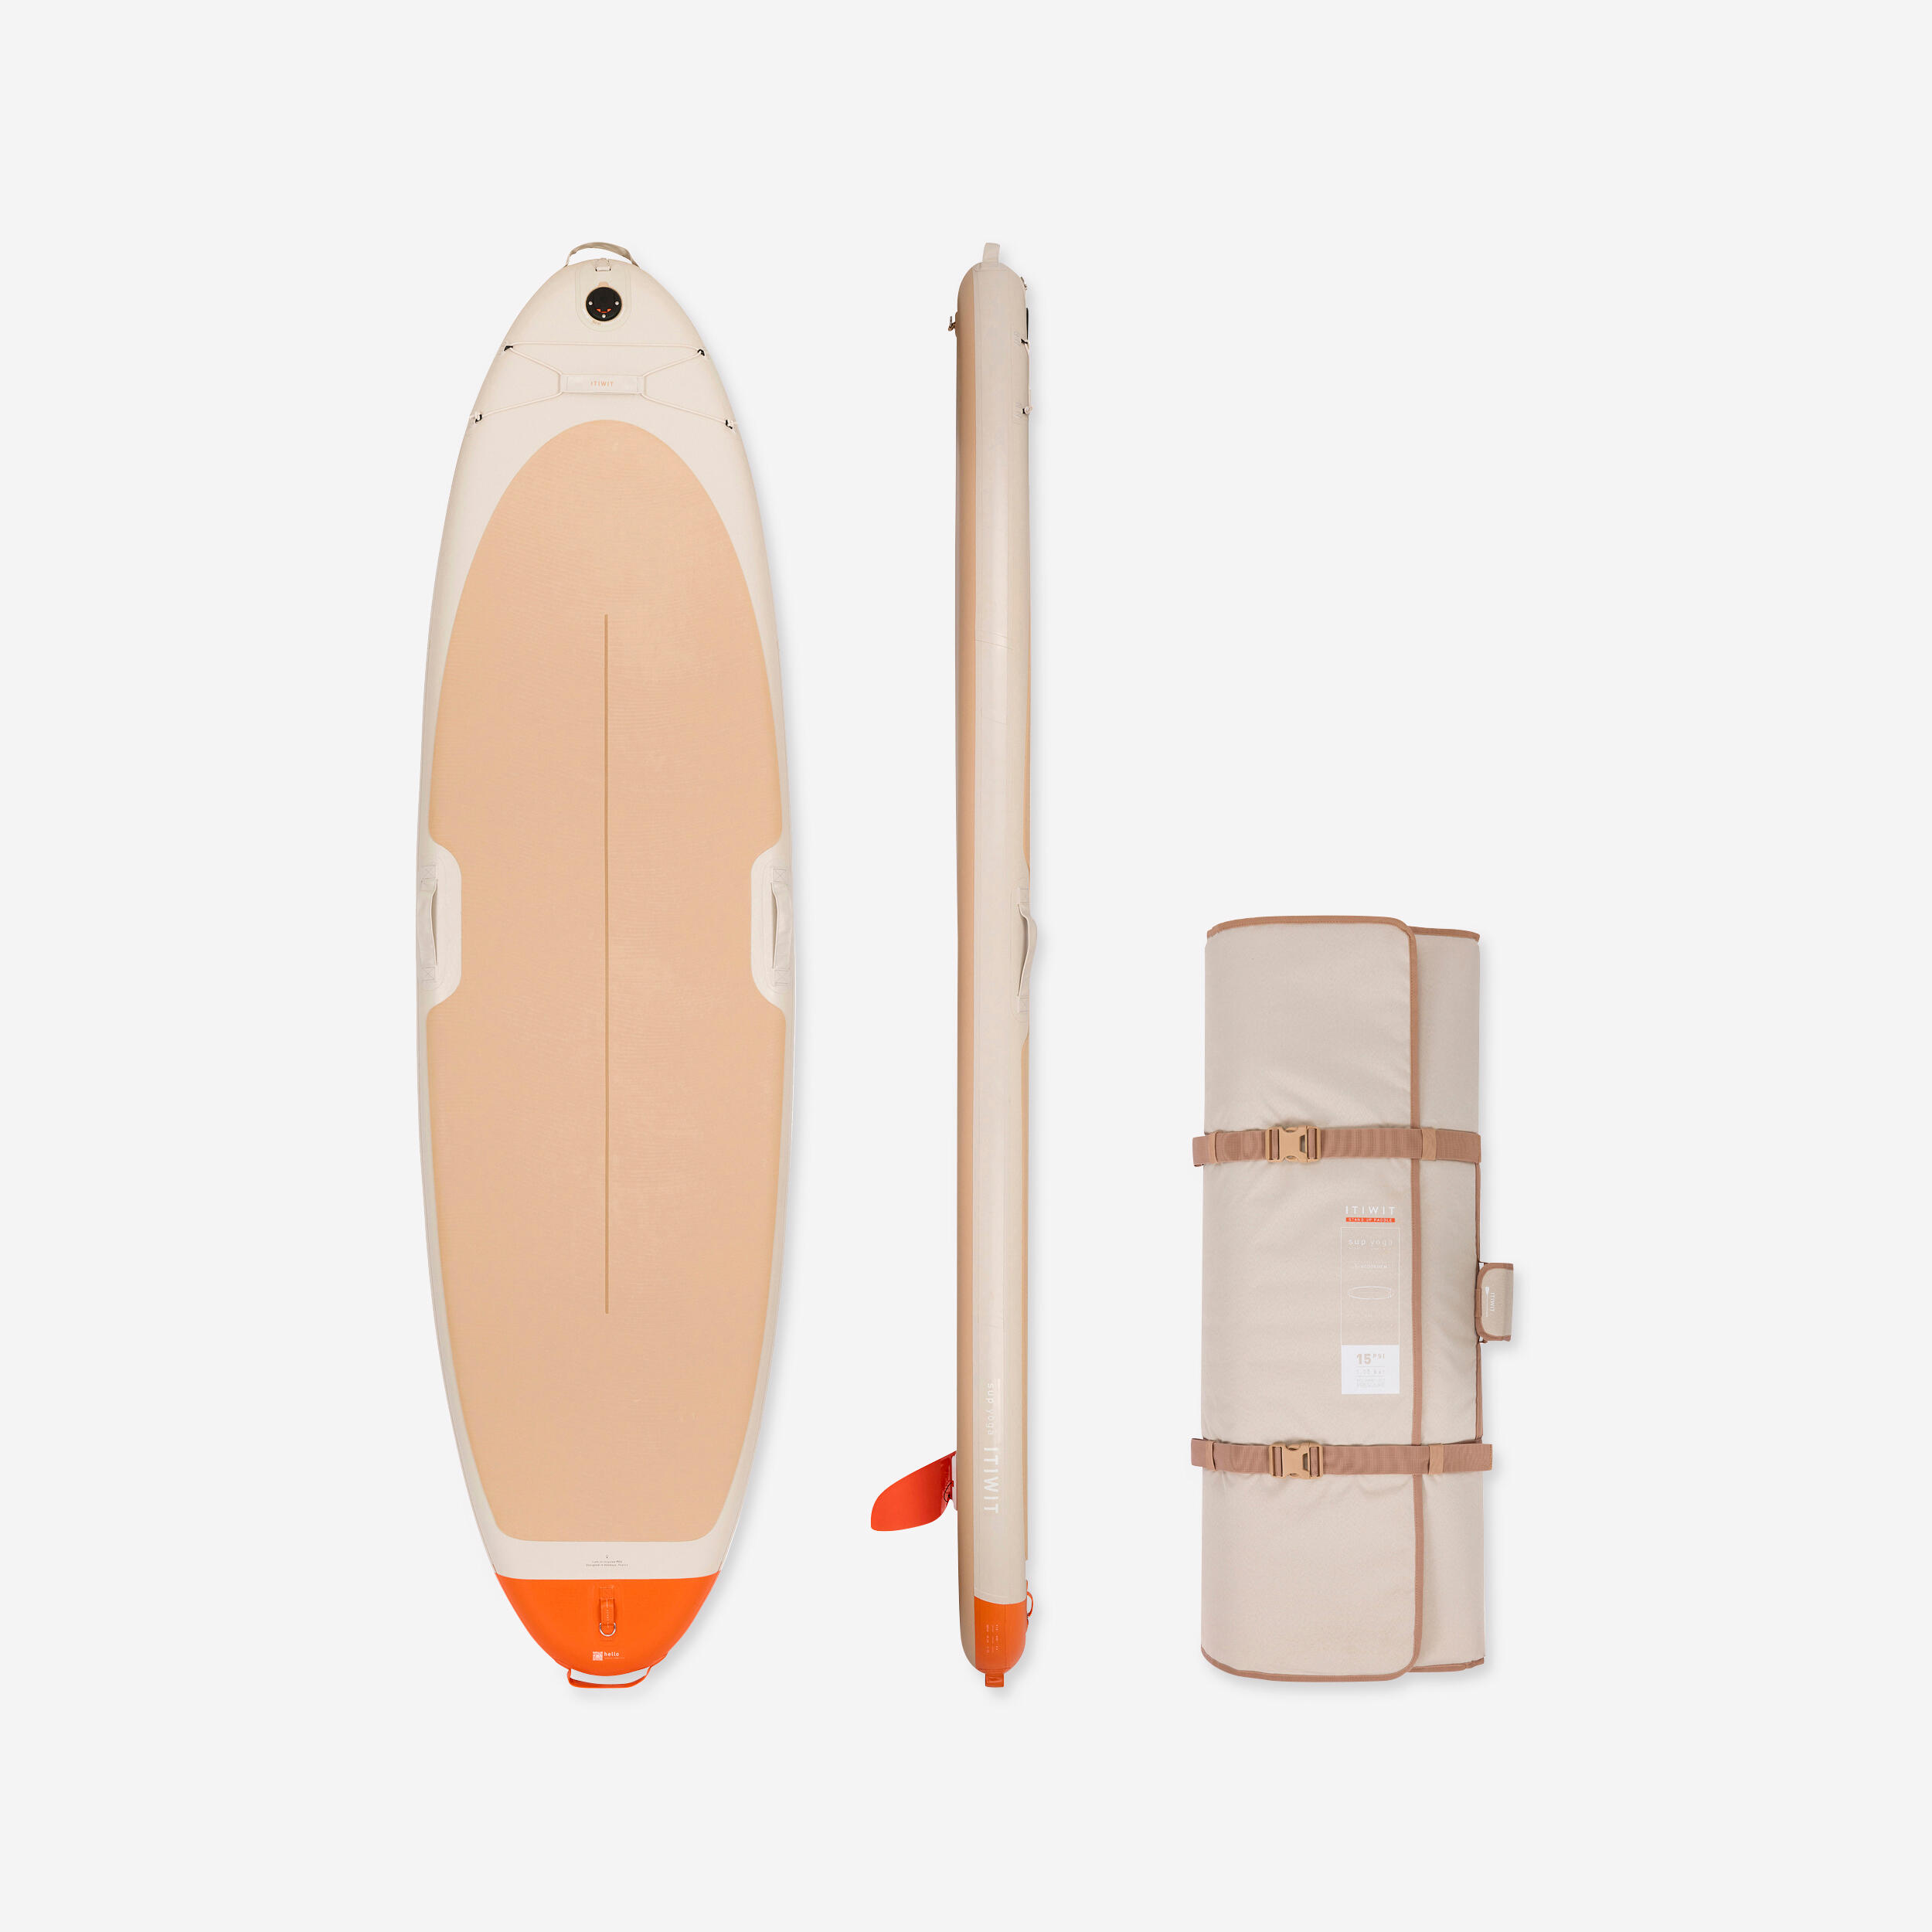 STAND UP PADDLE YOGA GONFLABIL DESIGN ECO decathlon.ro